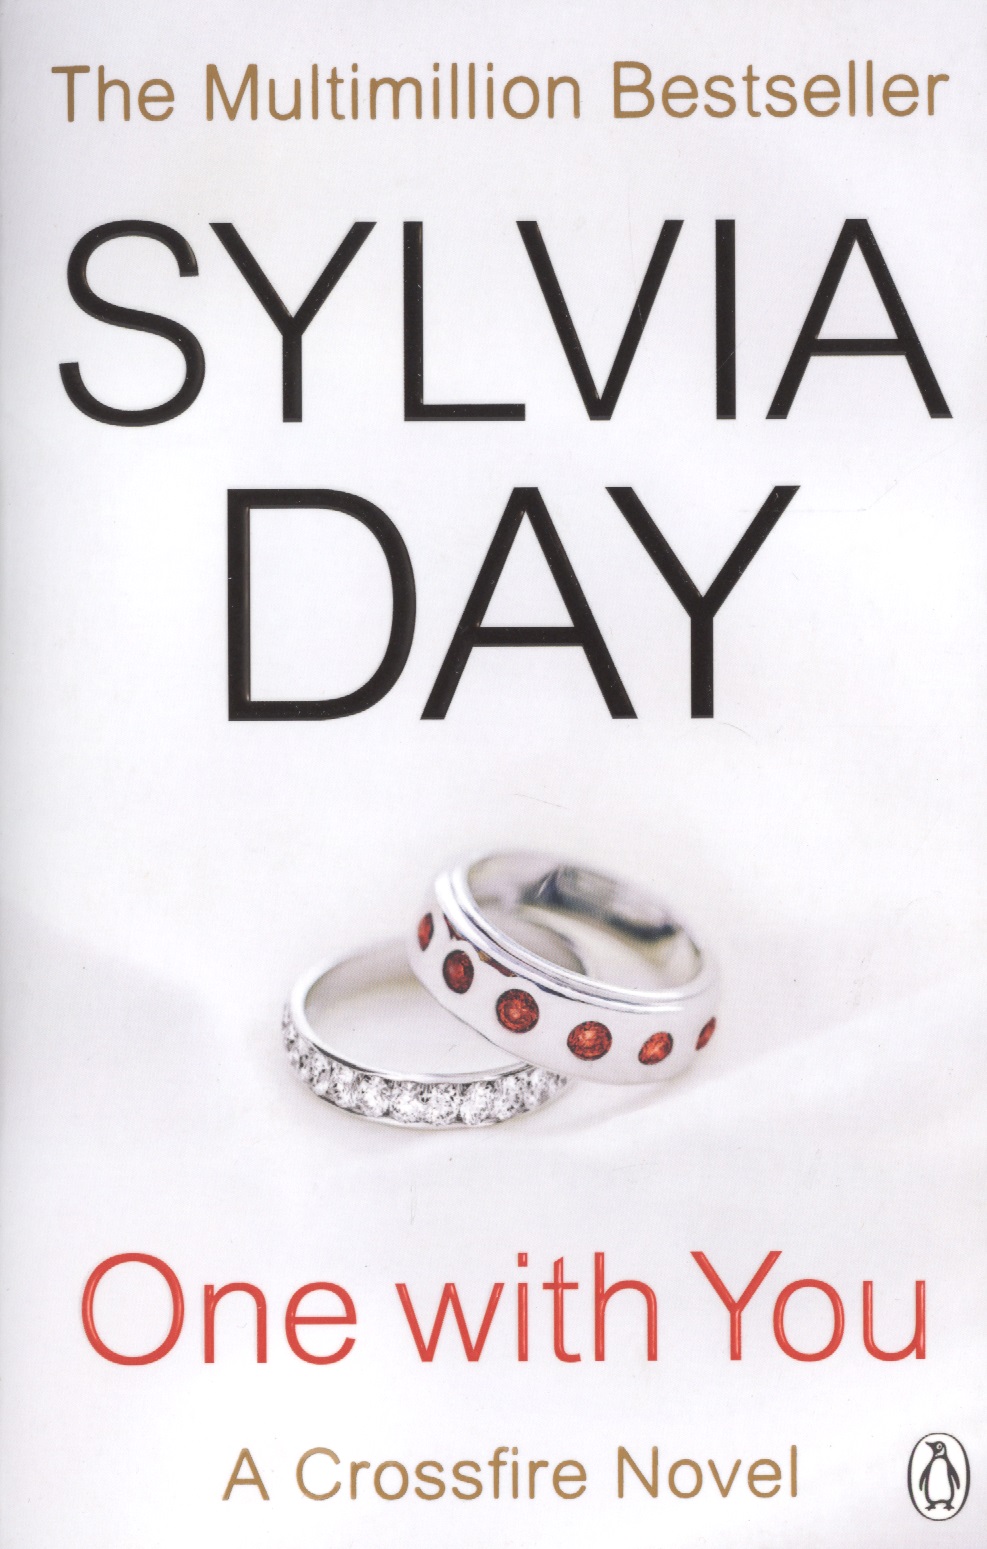 One with You. A Crossfire Novel day silvia one with you a crossfire novel